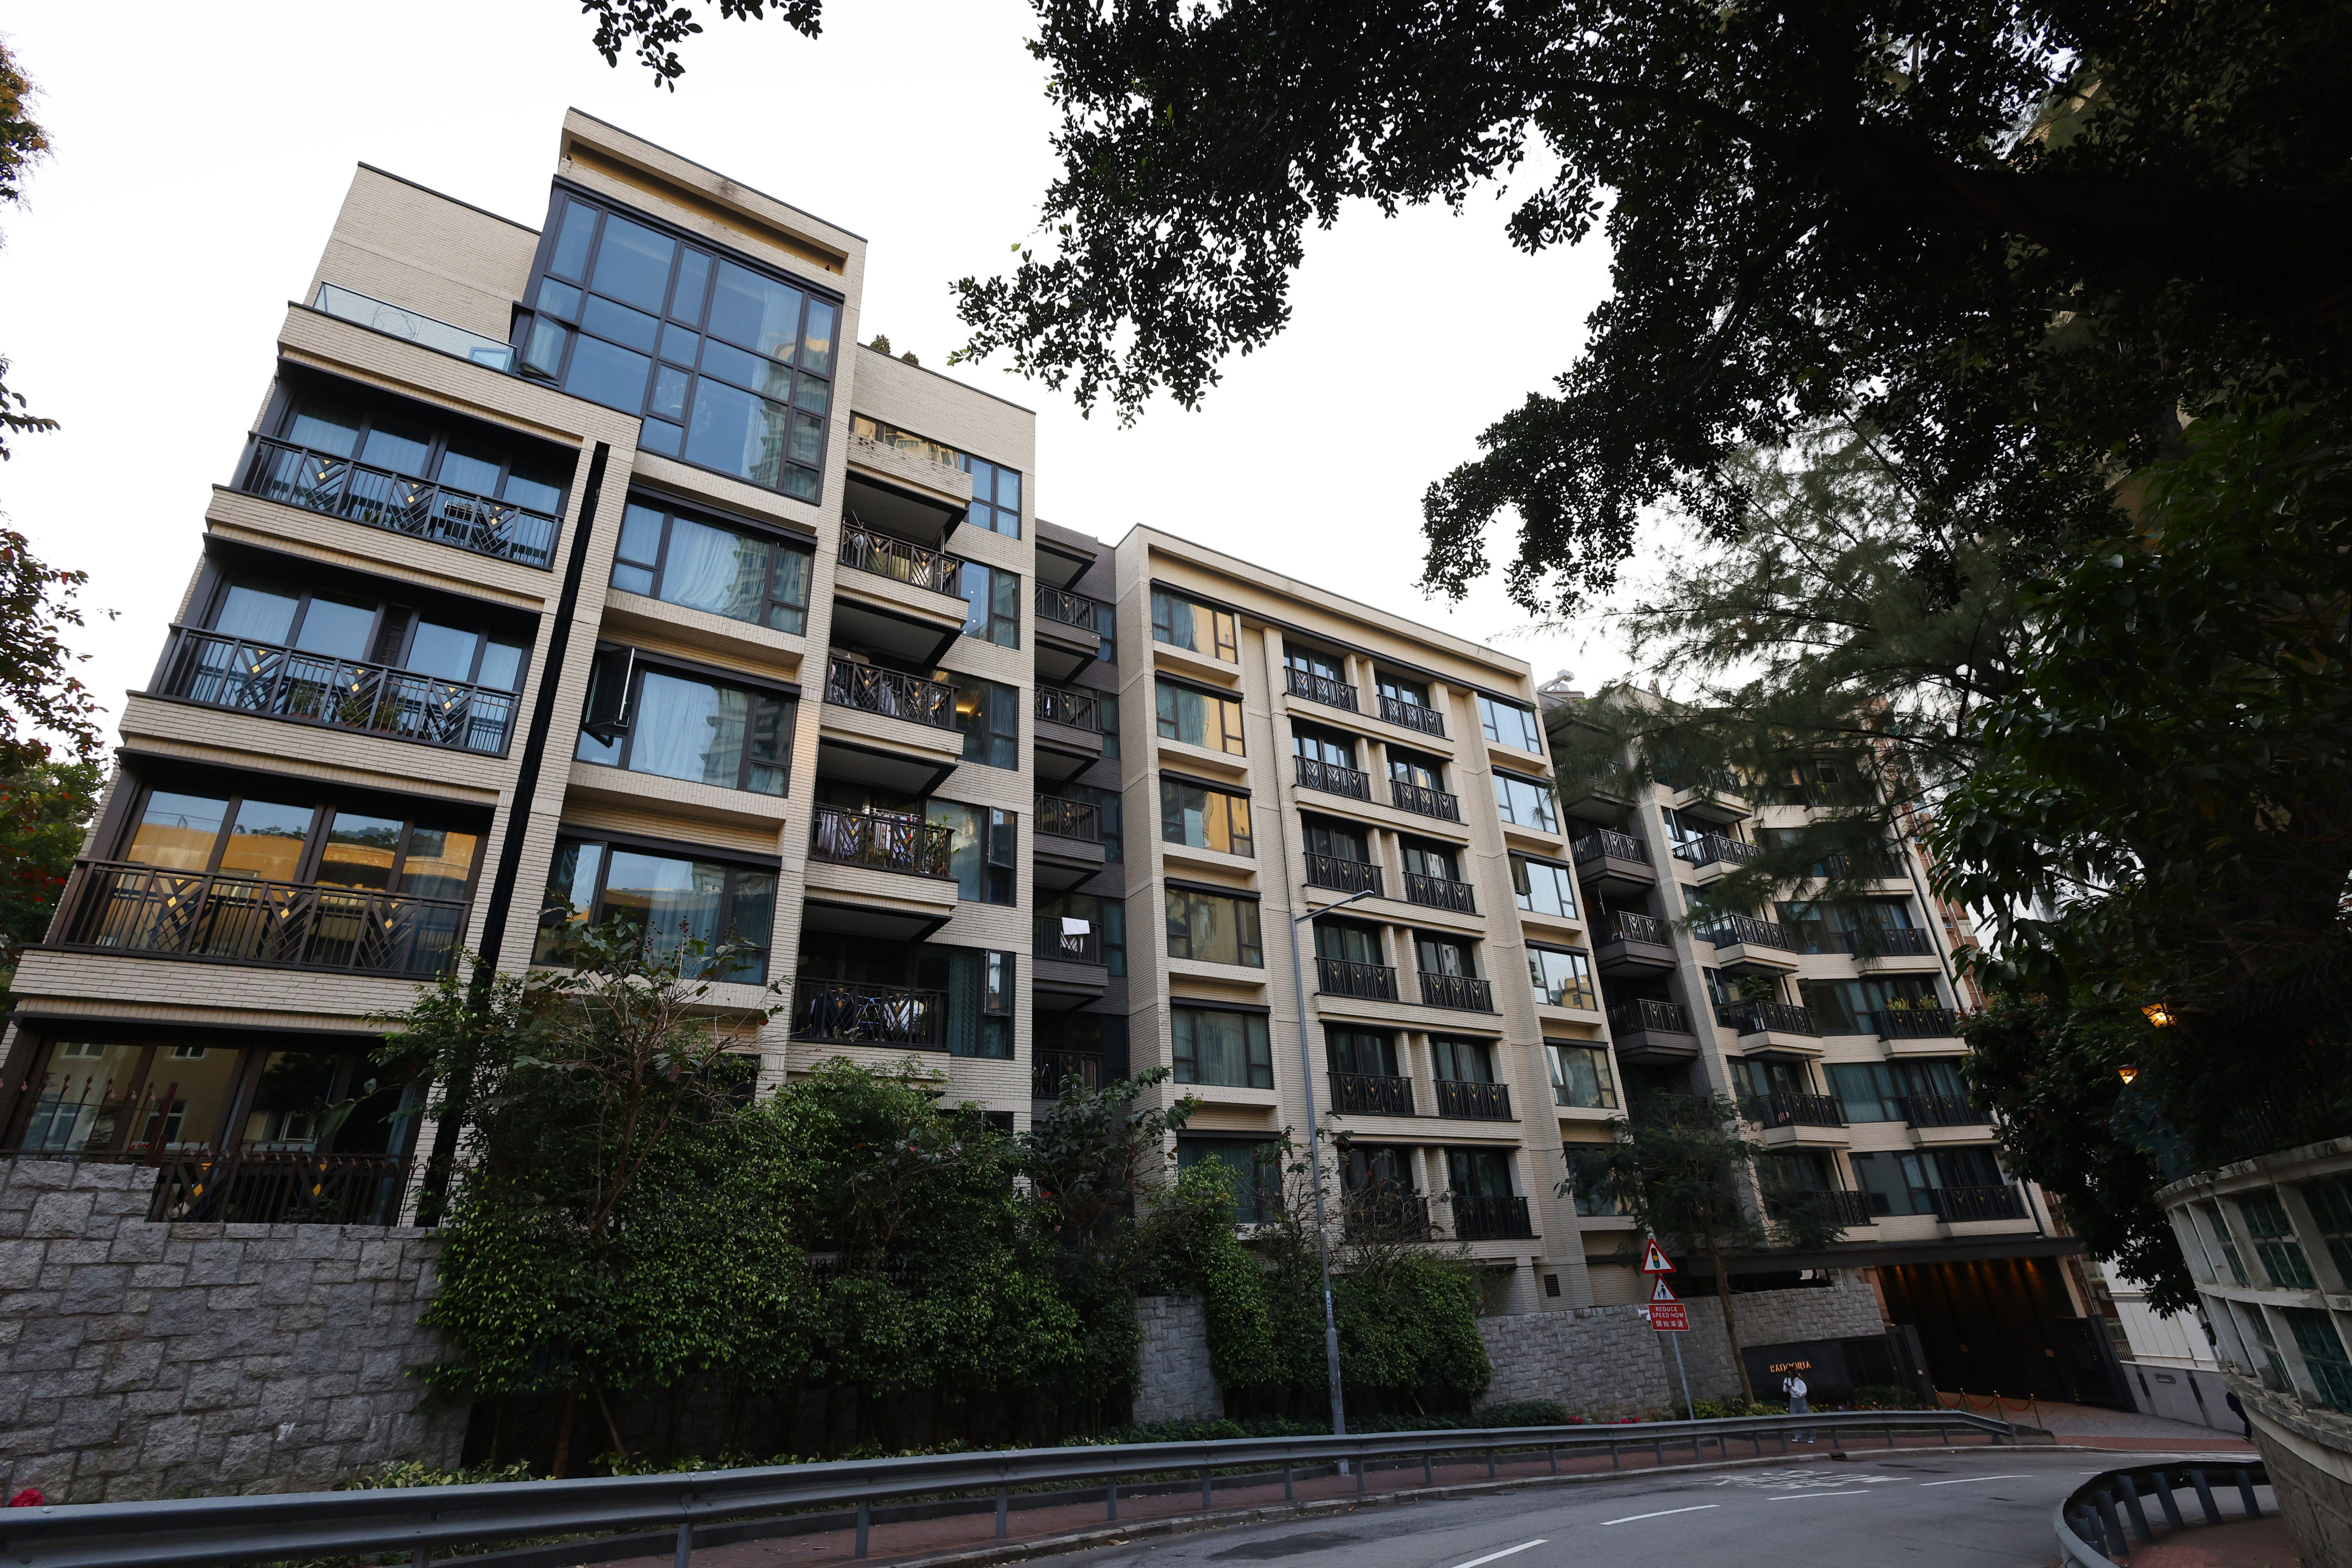 A luxury flat was bought under Kwong Kau’s name. Photo: Dickson Lee